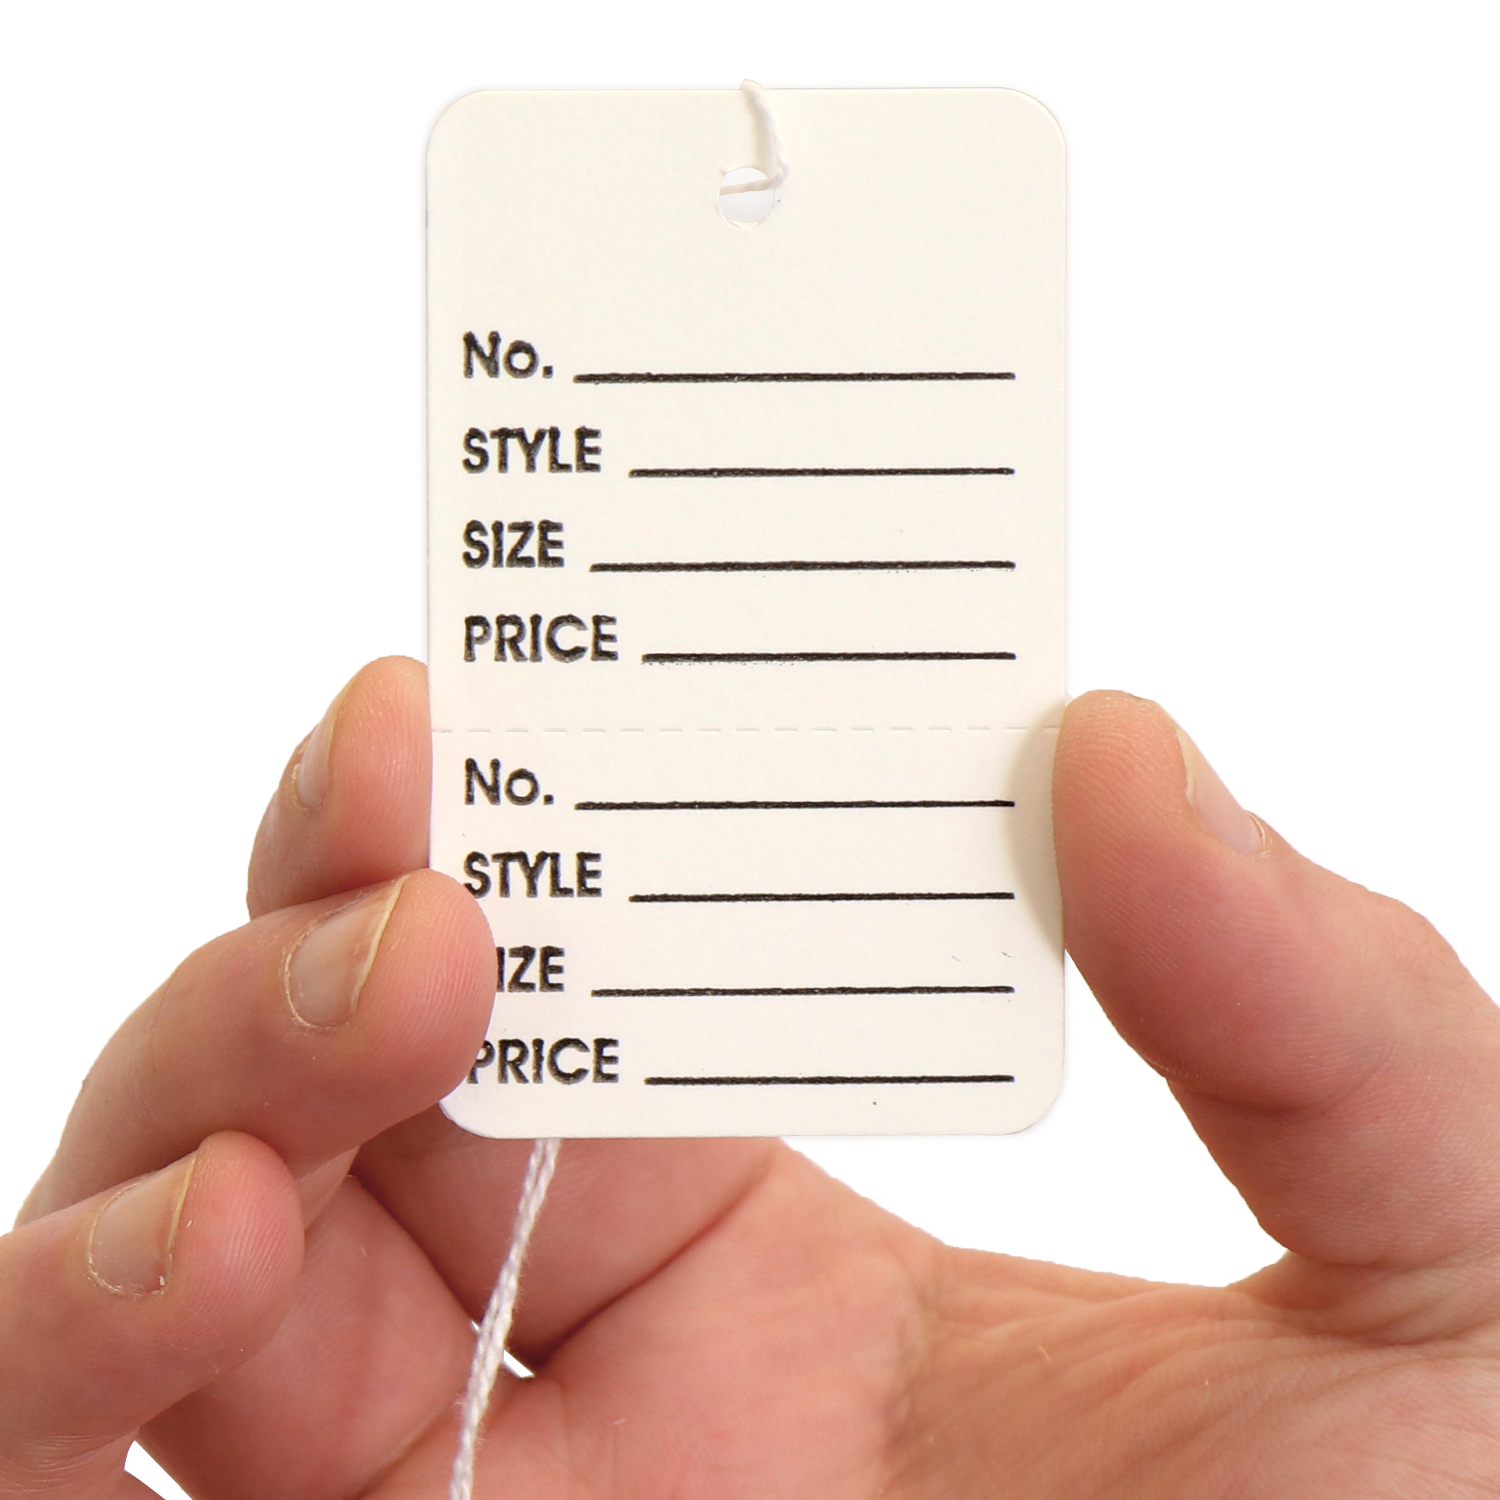 1.75 x 2.875 SmartSign Pack of 1000 Large Garment Tags